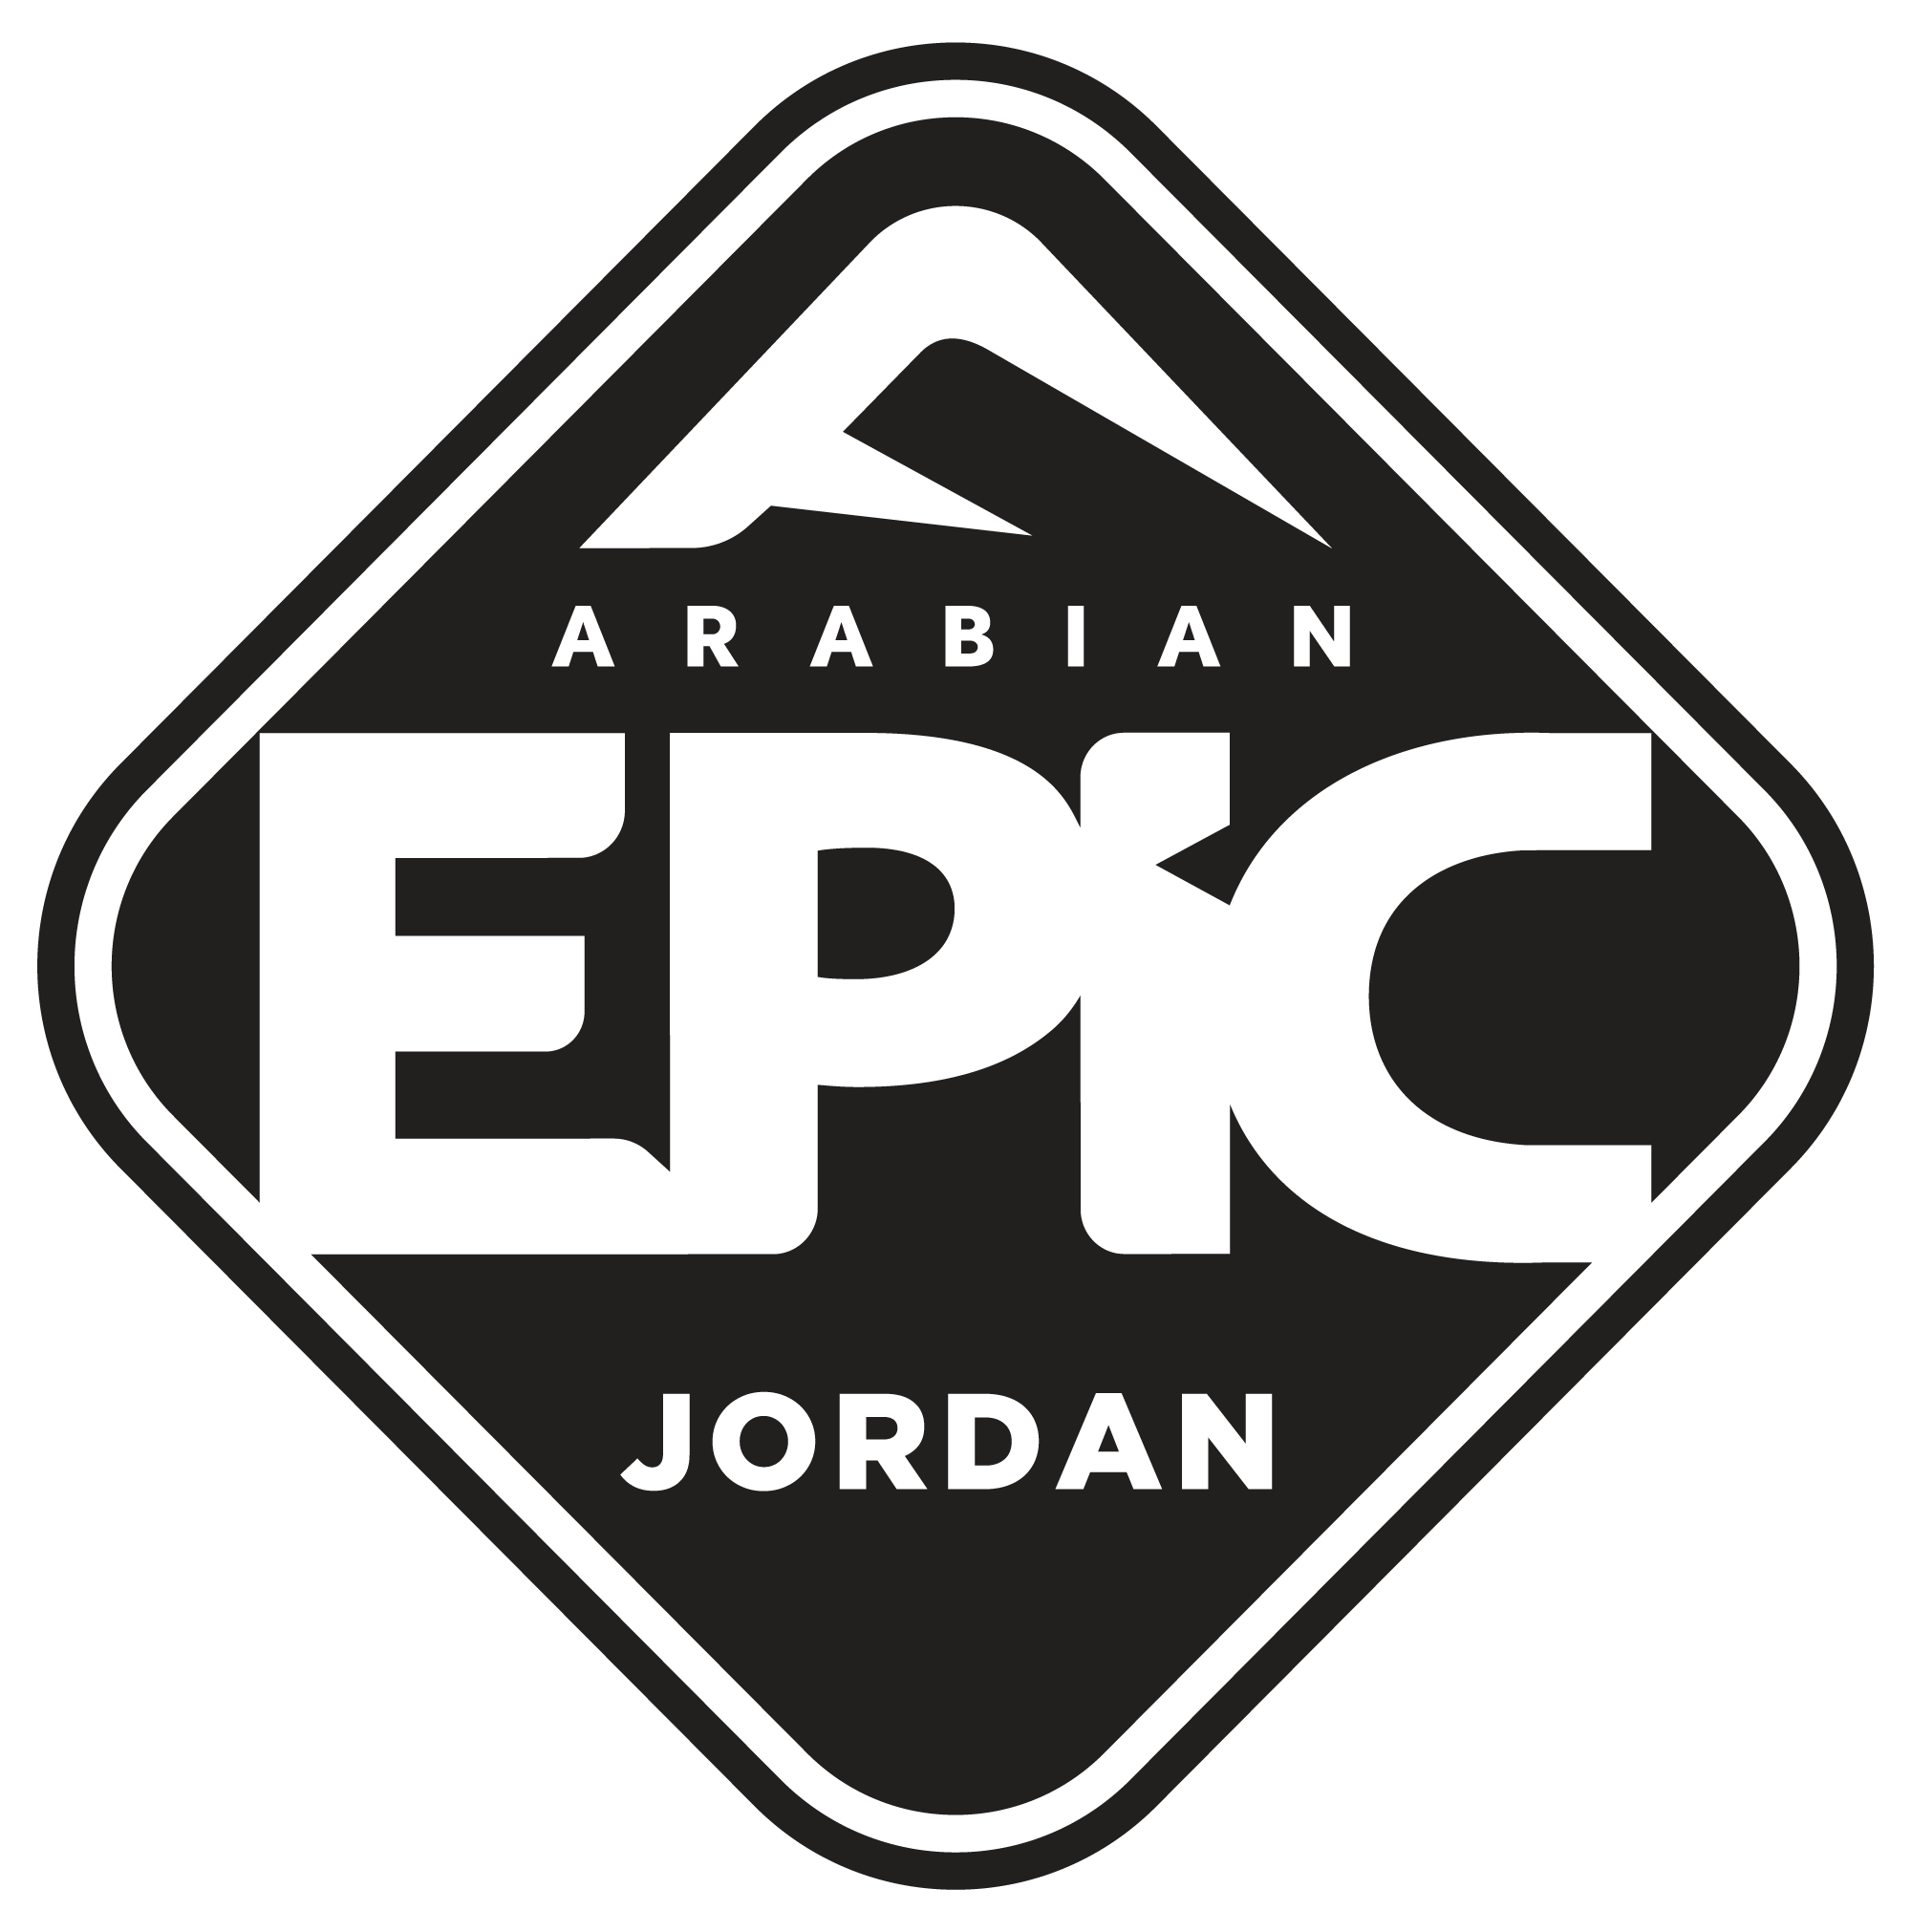 Epic Jordan Logo - The Arabian Epic Series - MTB Stage - as listed in StageRaces.com